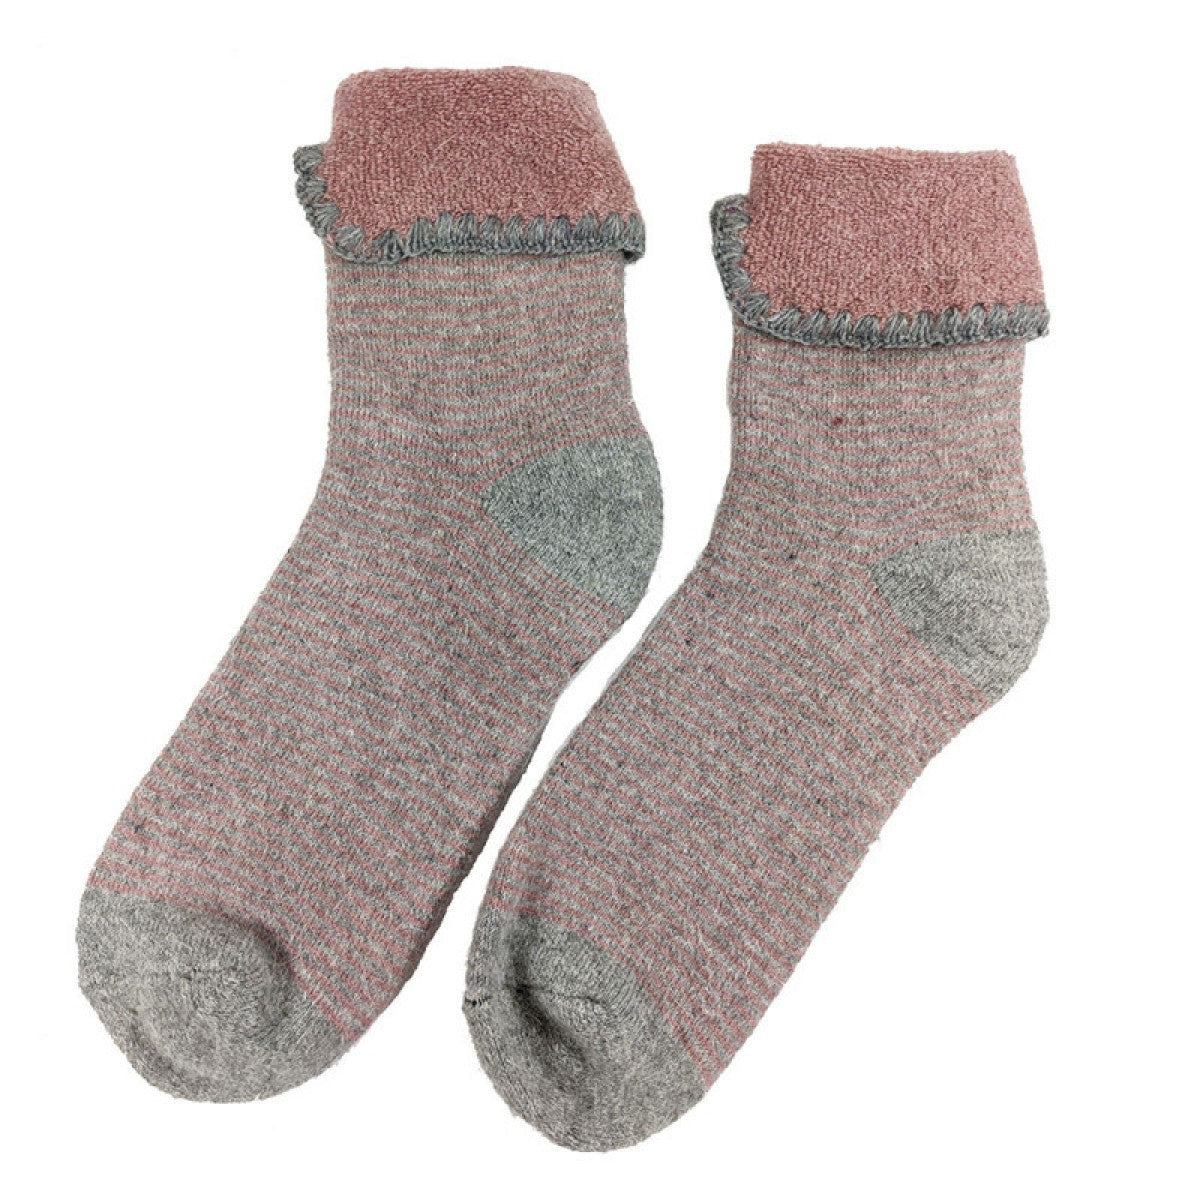 Grey and pink striped cuff socks, bed socks size 4-7